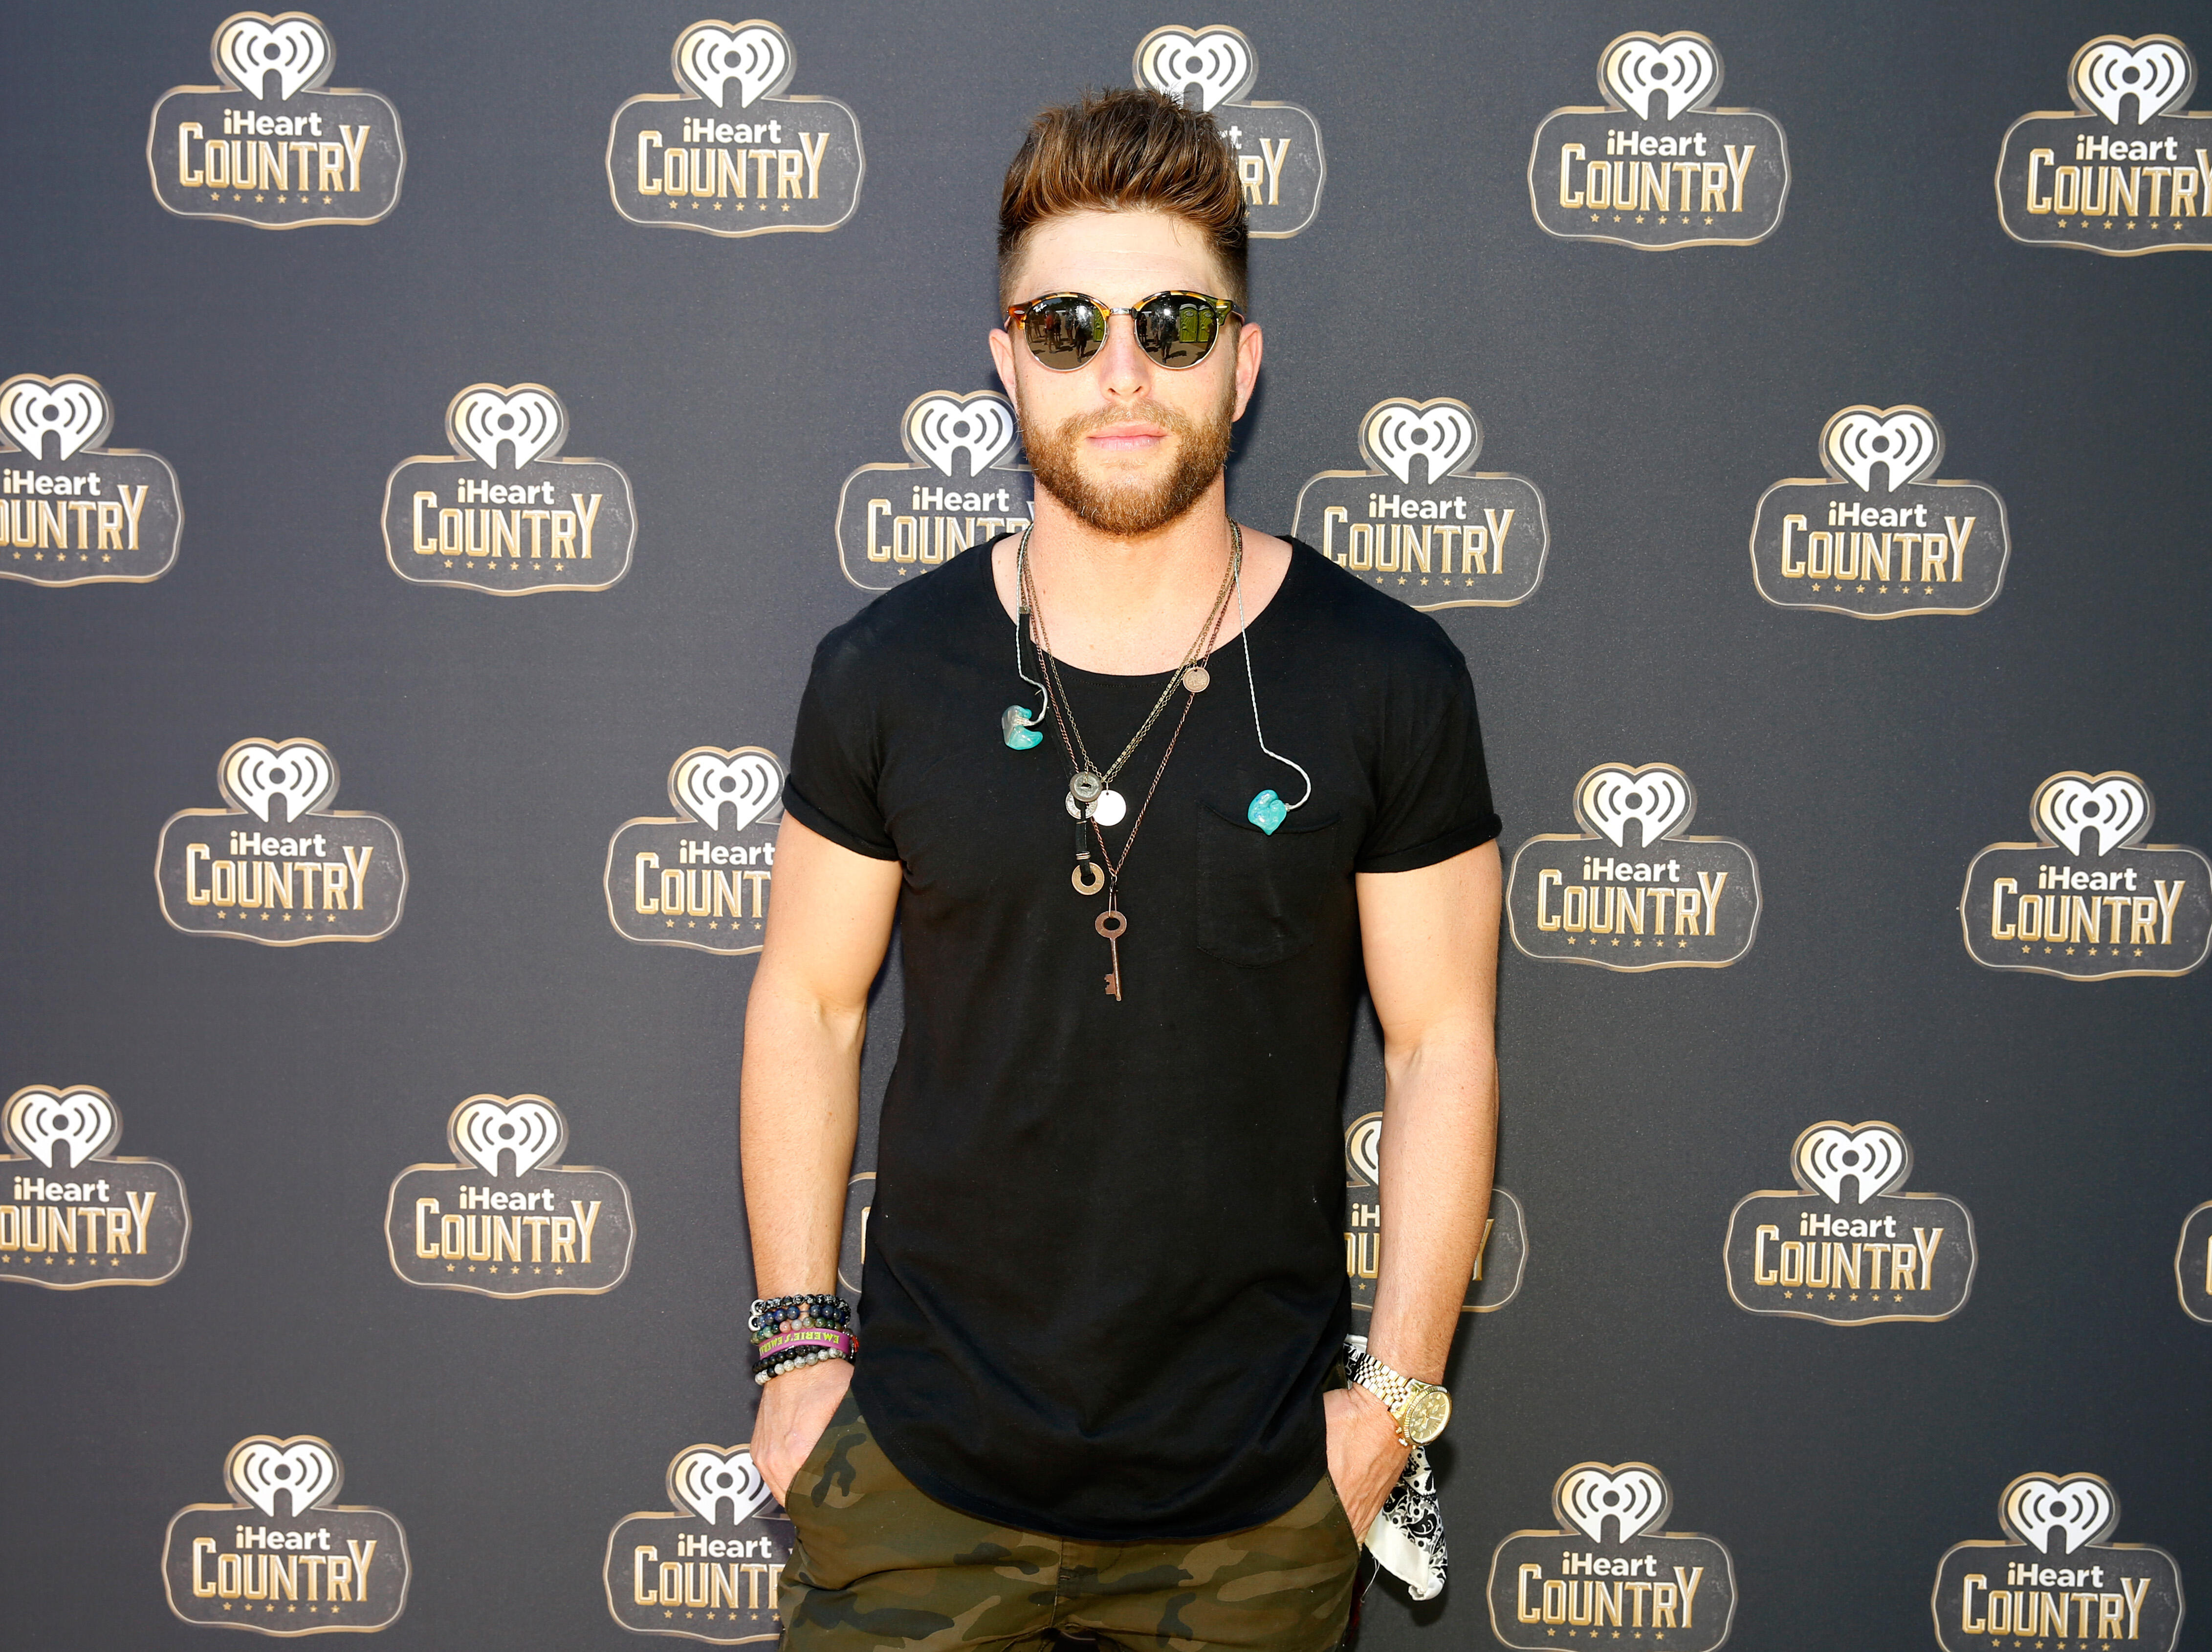 AUSTIN, TX - APRIL 30:  Singer Chris Lane attends the 2016 Daytime Village at the iHeartCountry Festival at The Frank Erwin Center on April 30, 2016 in Austin, Texas.  (Photo by Rick Kern/Getty Images for iHeartMedia)